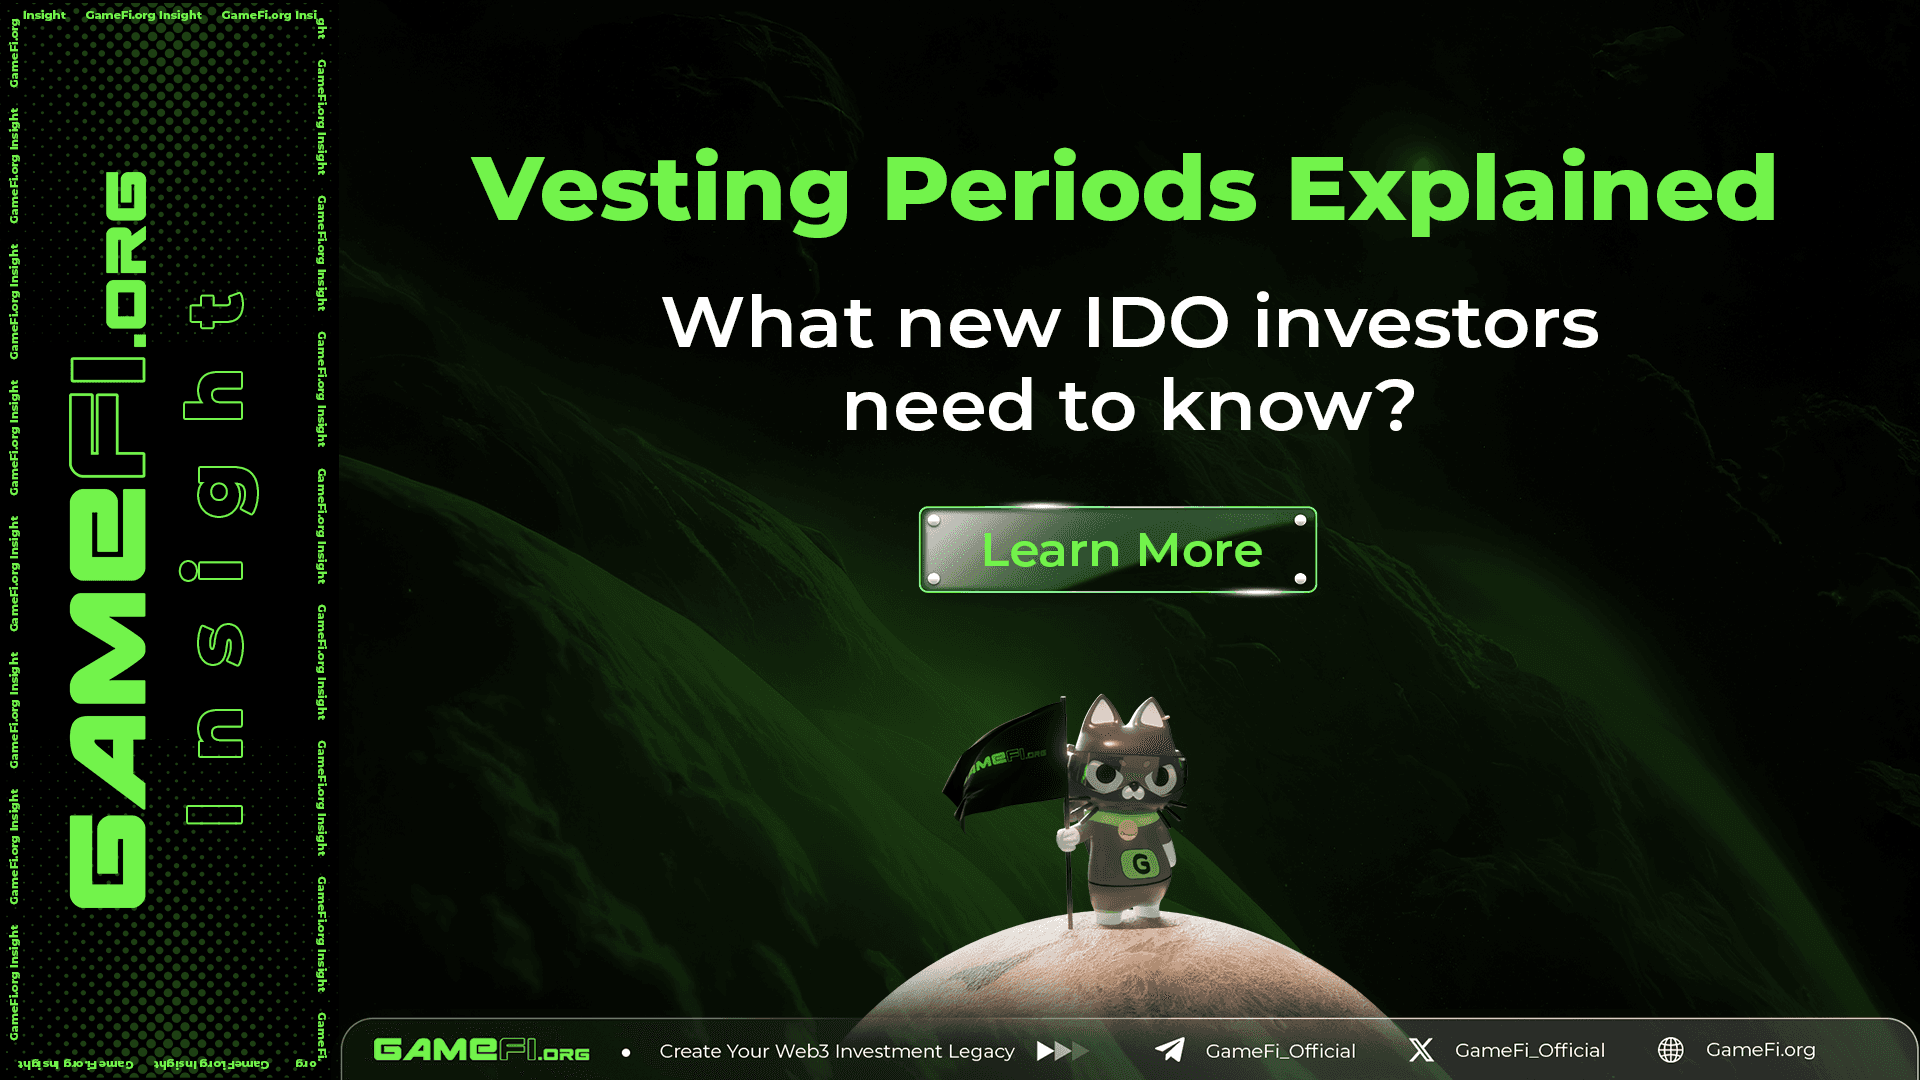 Vesting Periods Explained: What new IDO investors need to know?